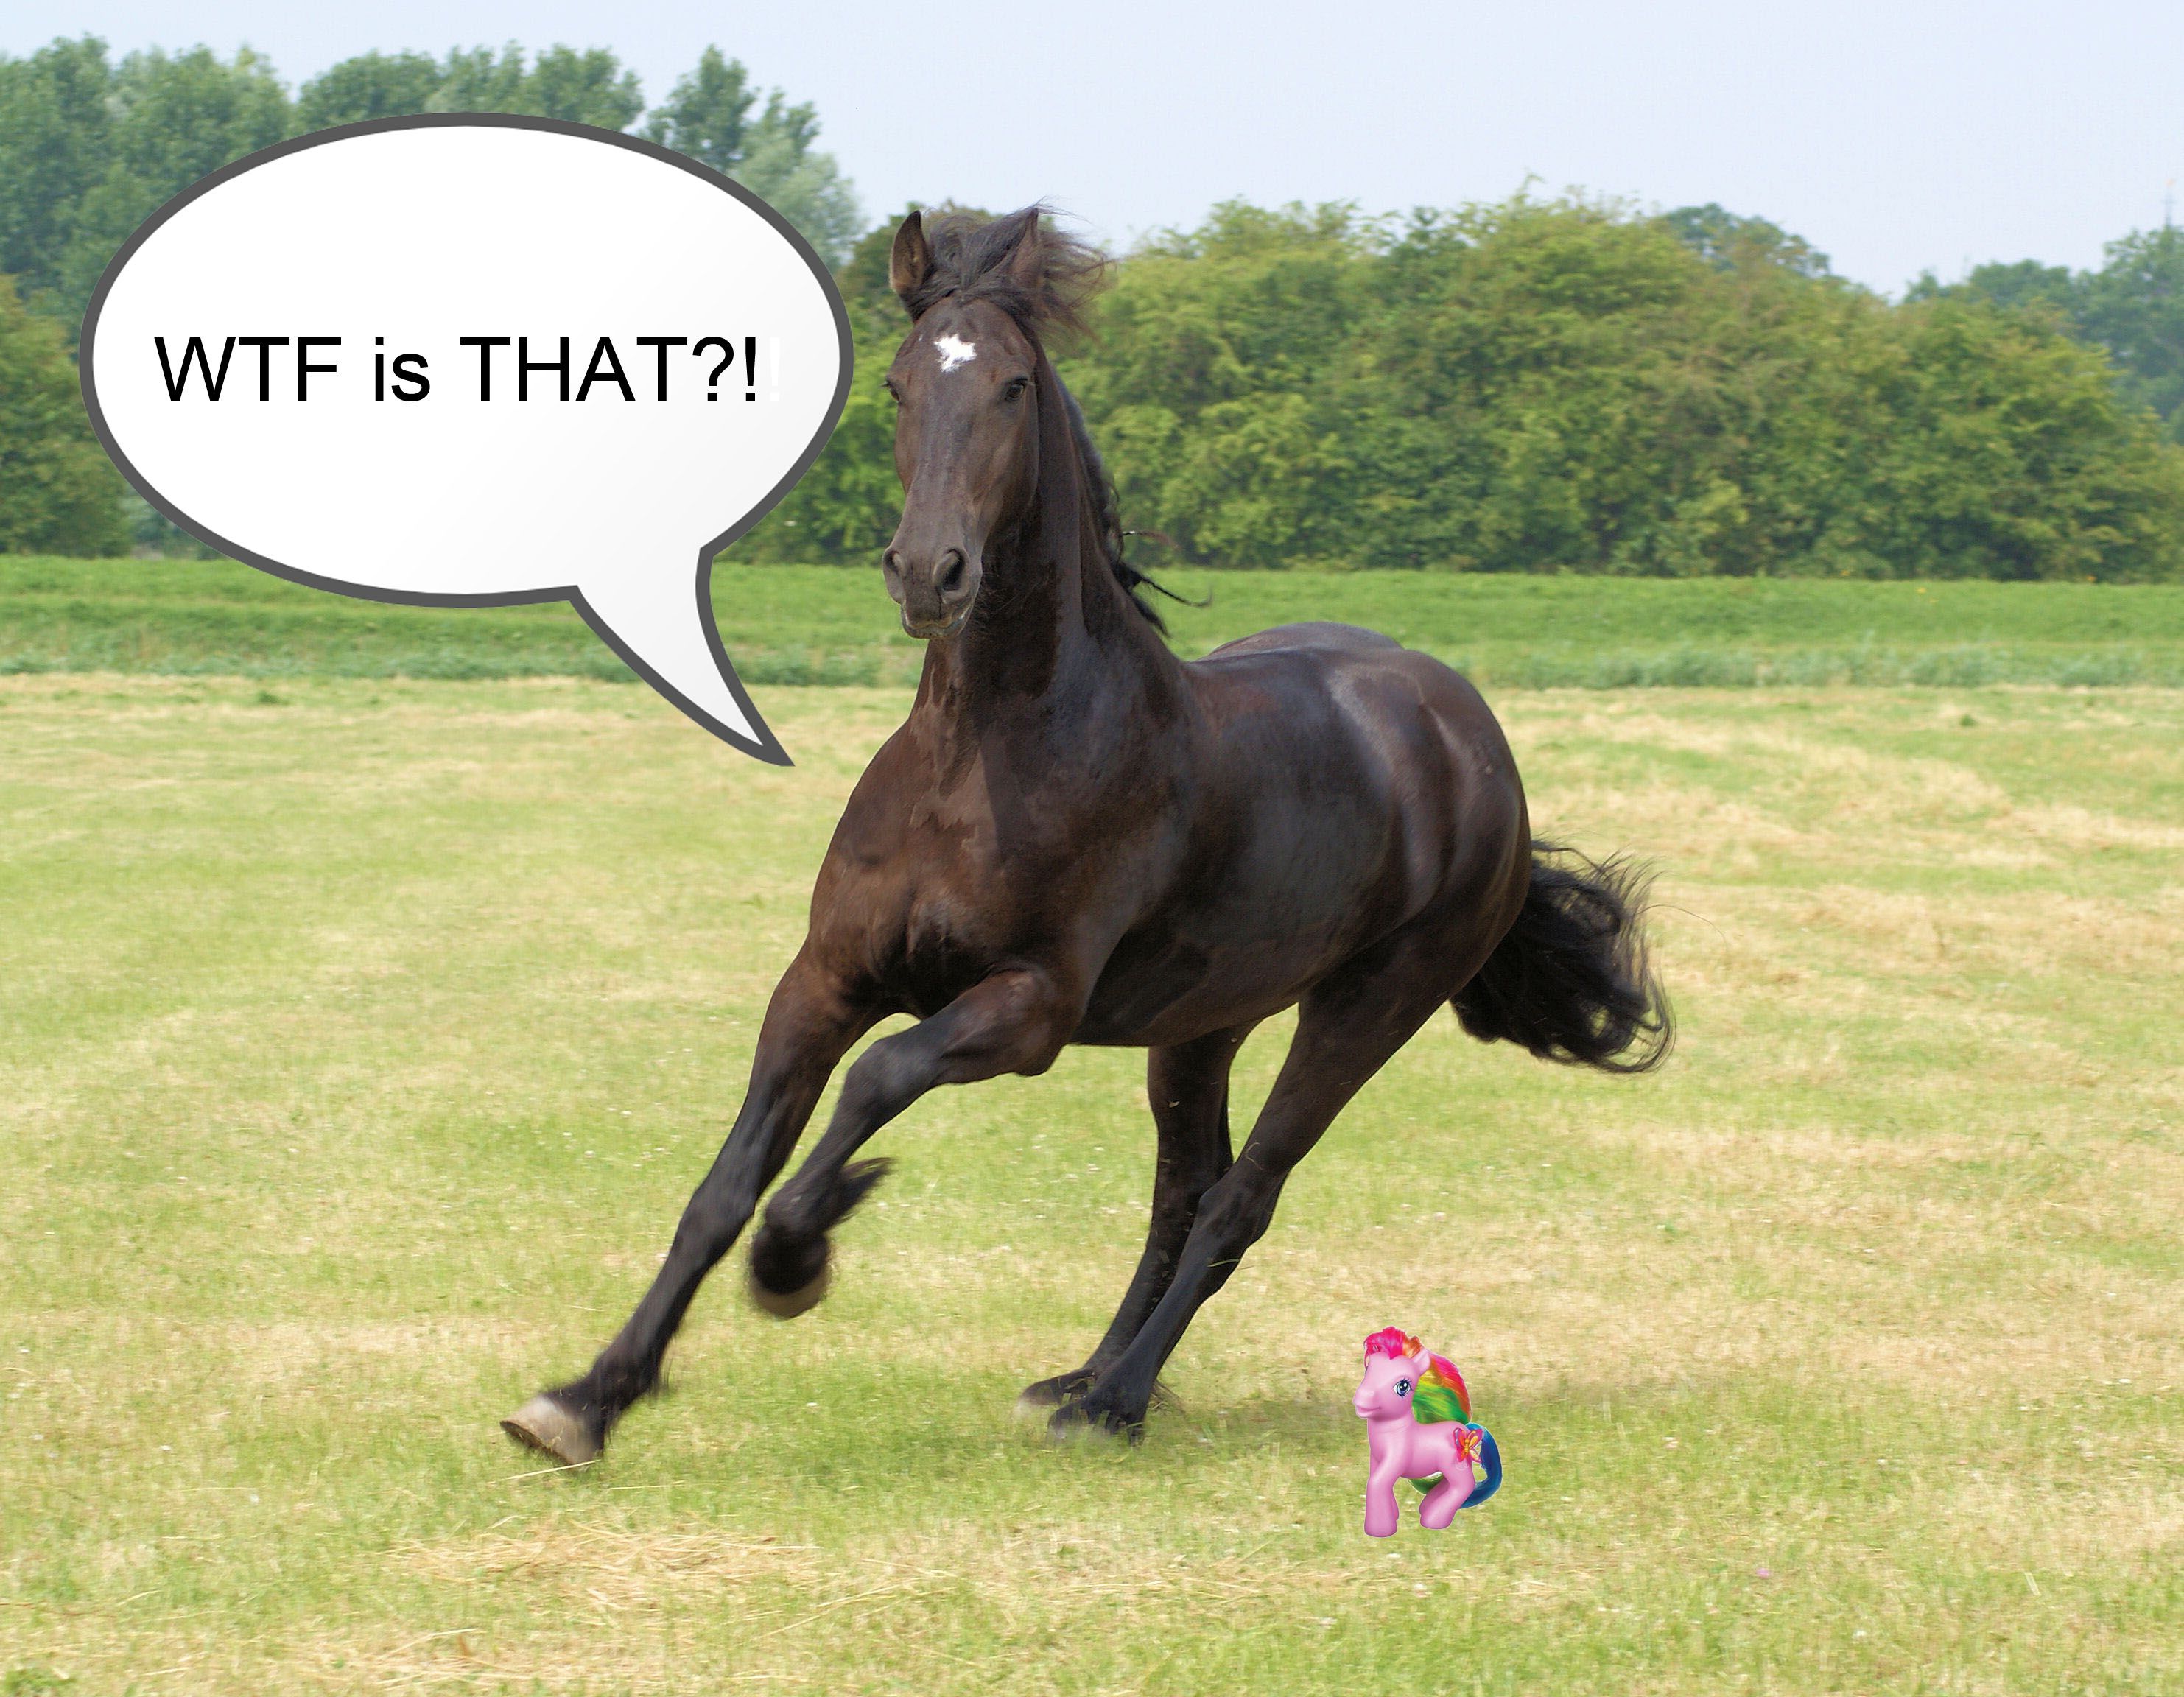 Funny Horse Picture With Captions Gallery 1035 - Funny Horse Wallpaper